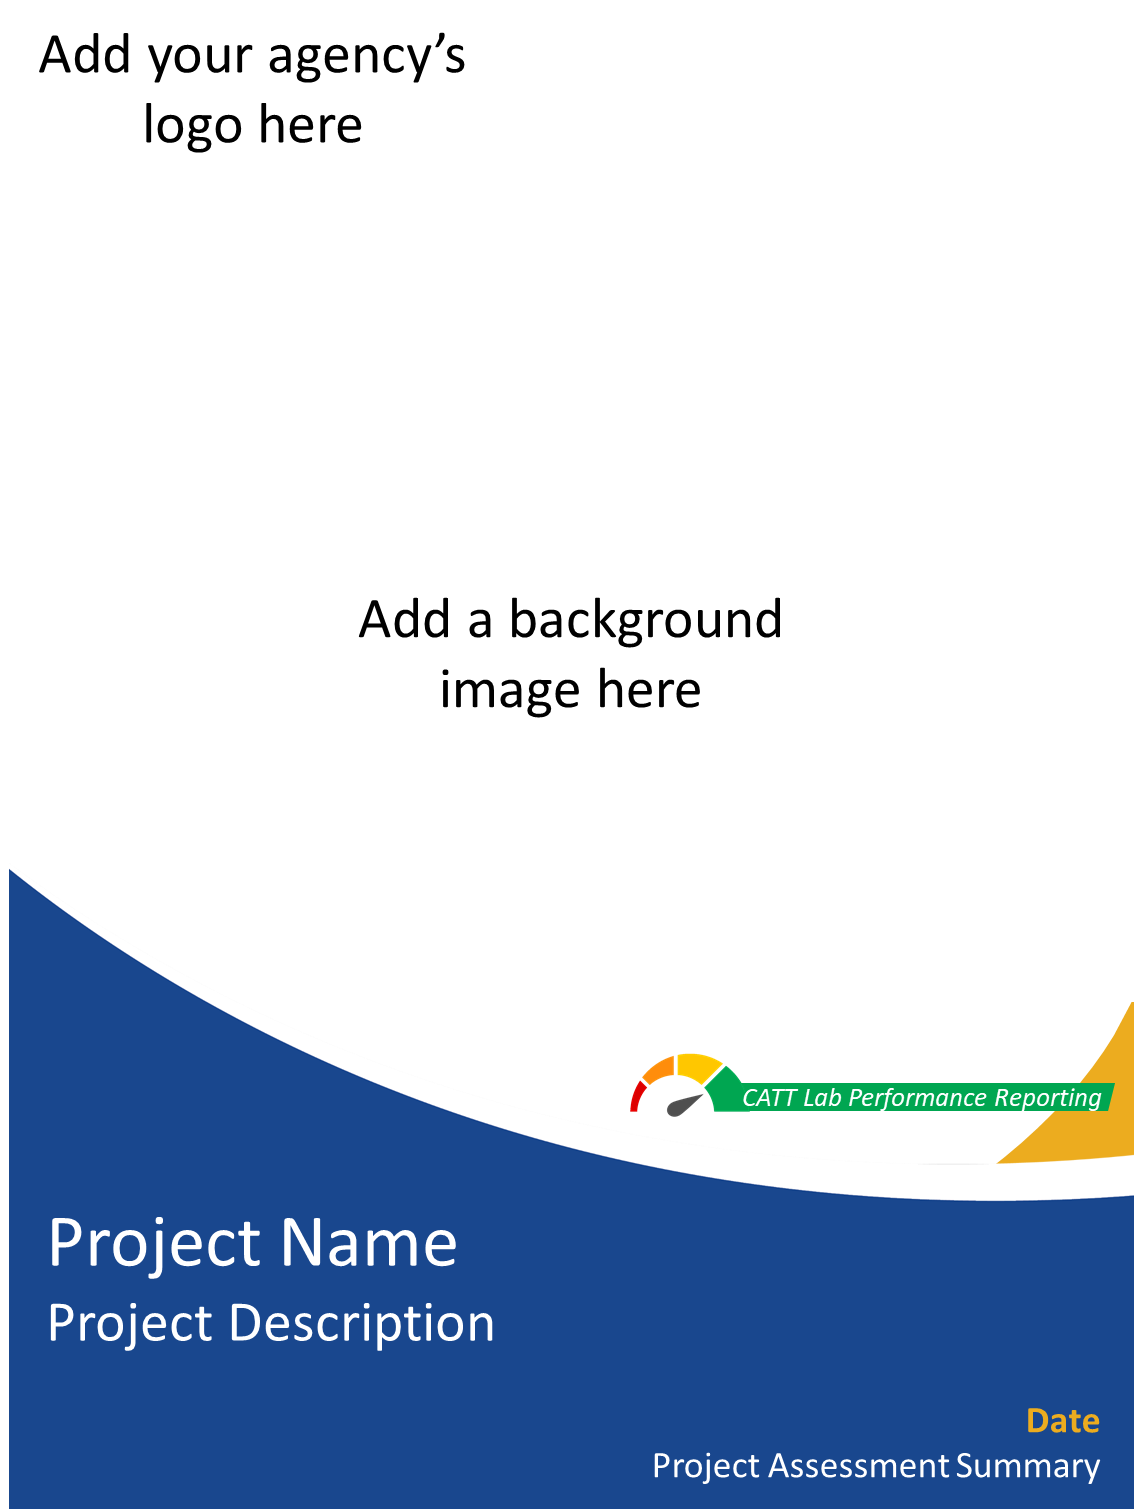 Blank cover page template. There's a space for the agency's logo in the top left, space for the project name and a brief description near the bottom left, space for a date and the phrase "Project Assessment Summary" in the bottom right, and the bulk of the page is left open for a large background image of the user's choice.